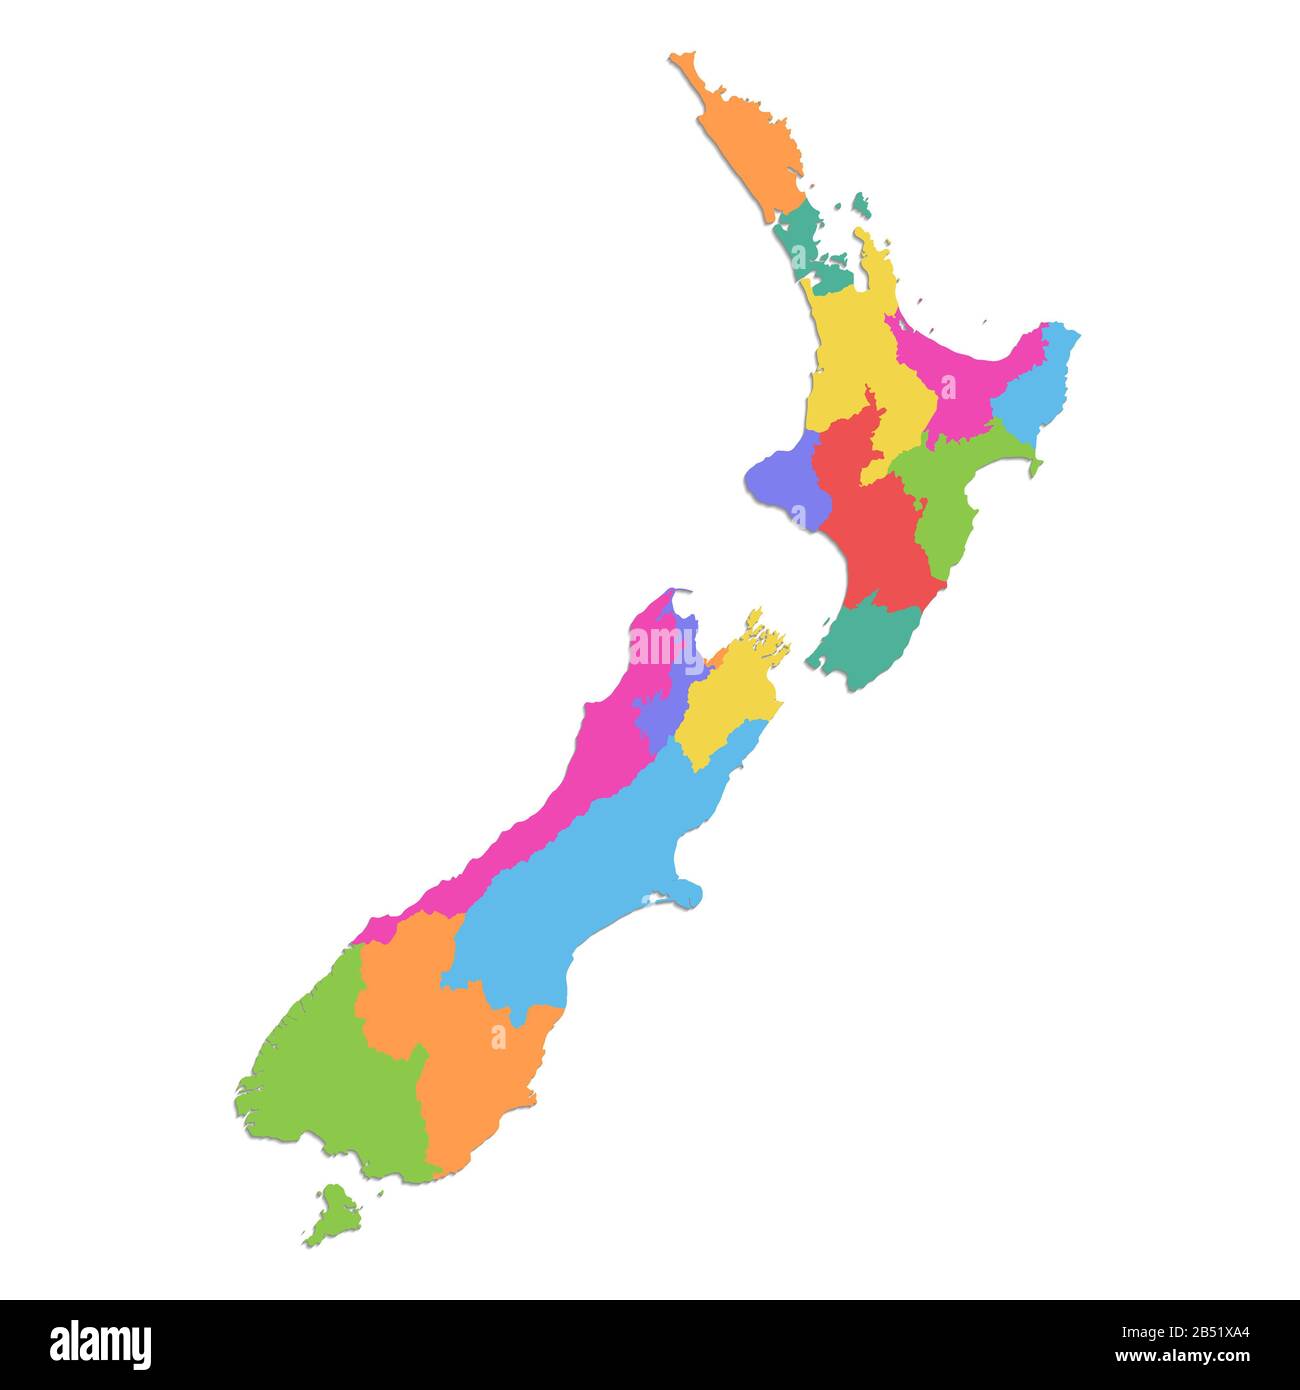 New Zealand map, administrative division, colors map isolated on white background blank Stock Photo